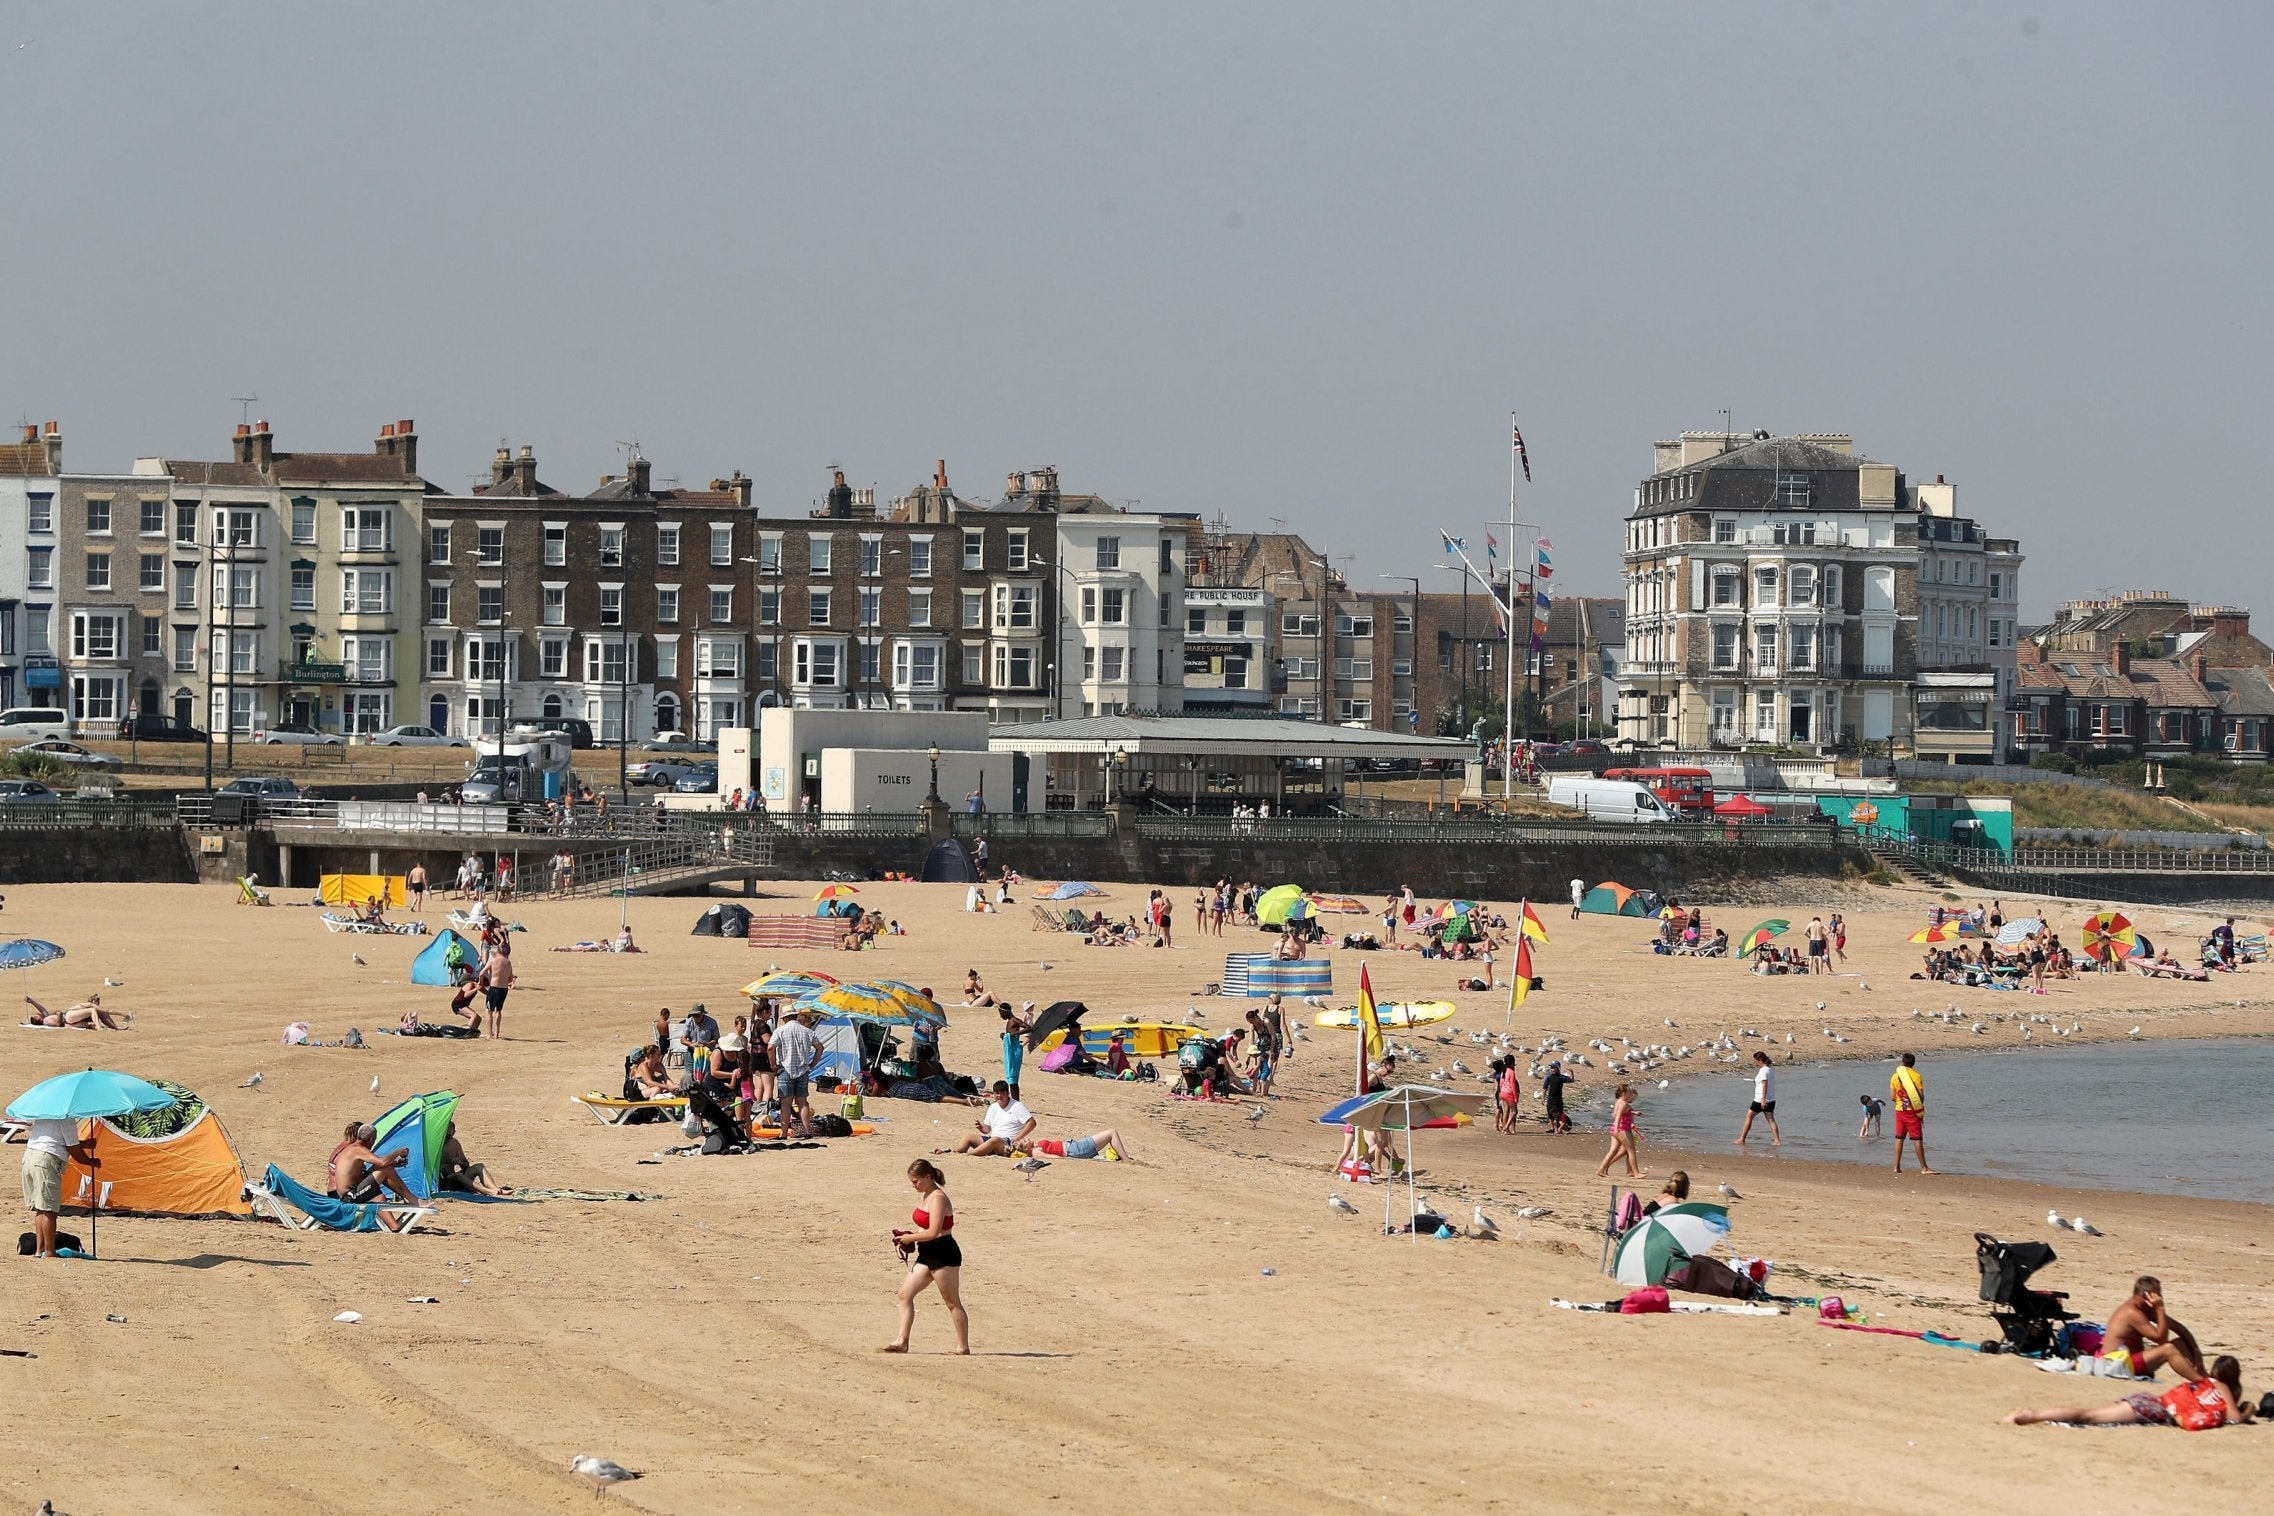 People on the beach in Margate, Kent